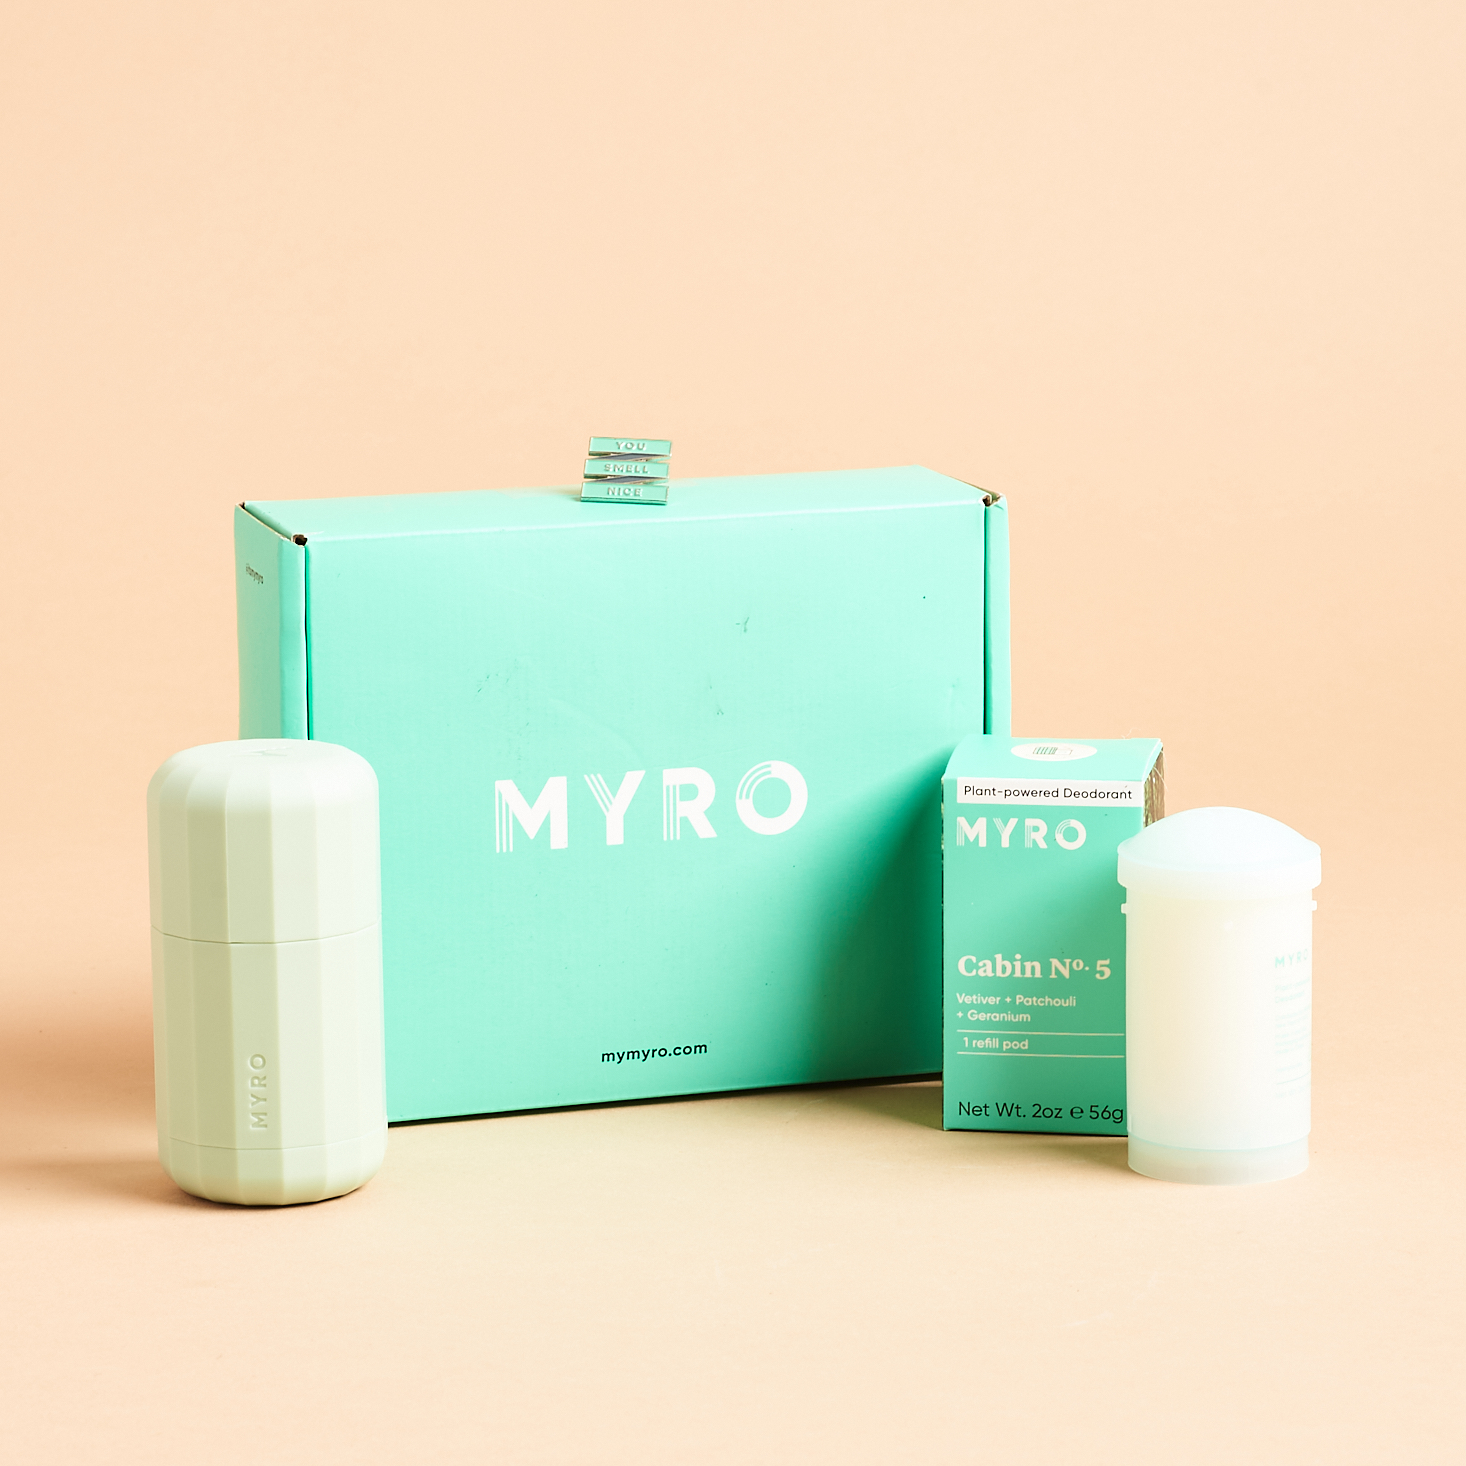 My Myro Deodorant Review – Is this refillable deodorant the best natural brand?